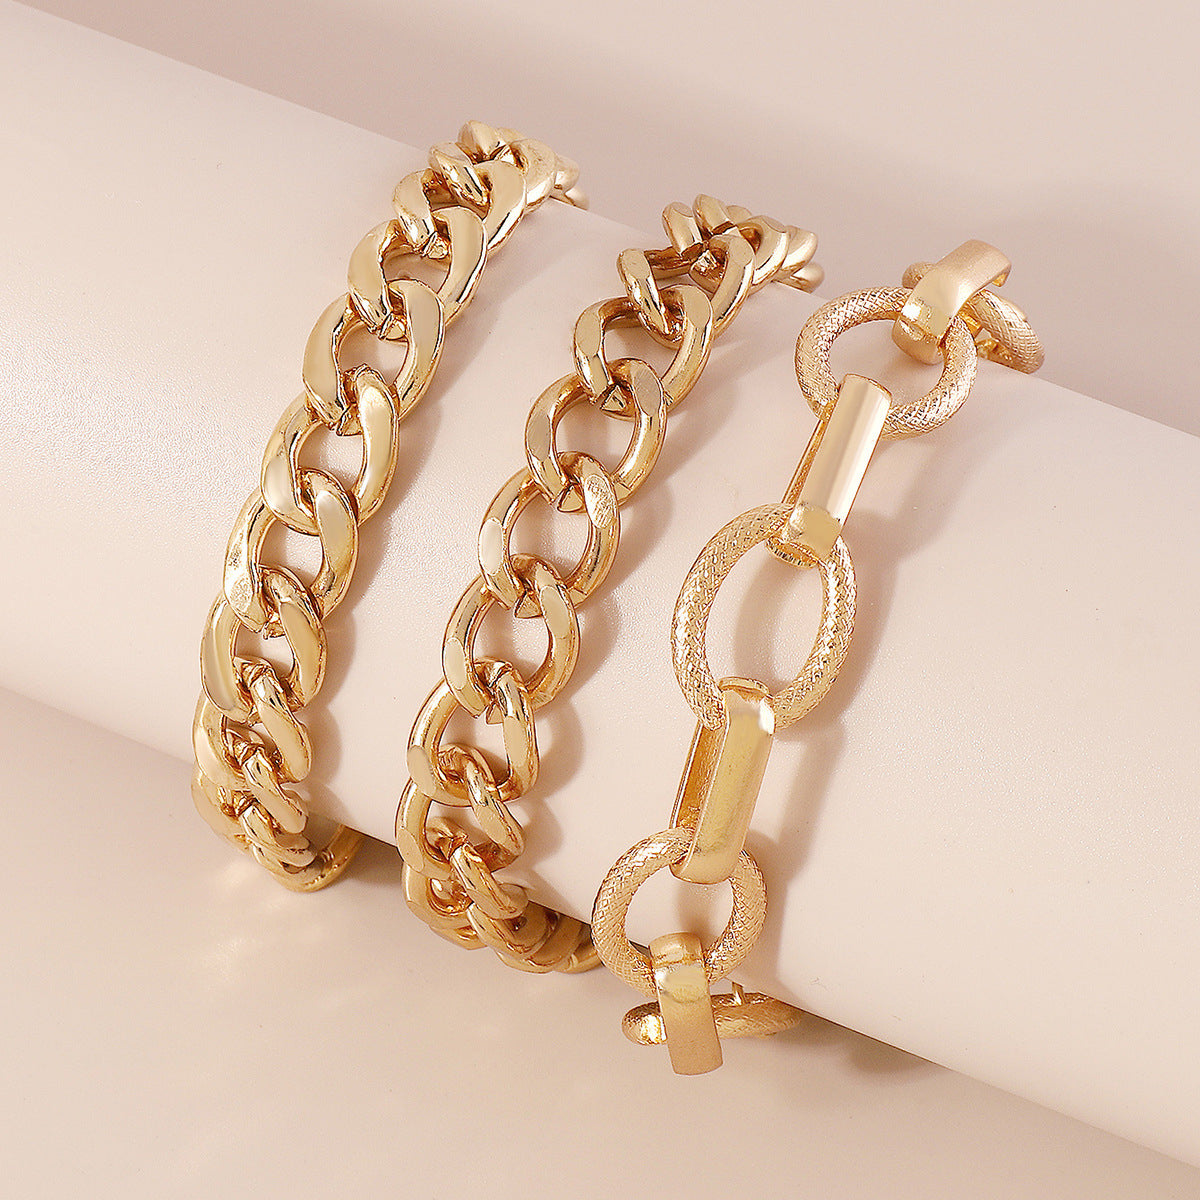 18K Gold-Plated Textured Cable Chain Bracelet Set